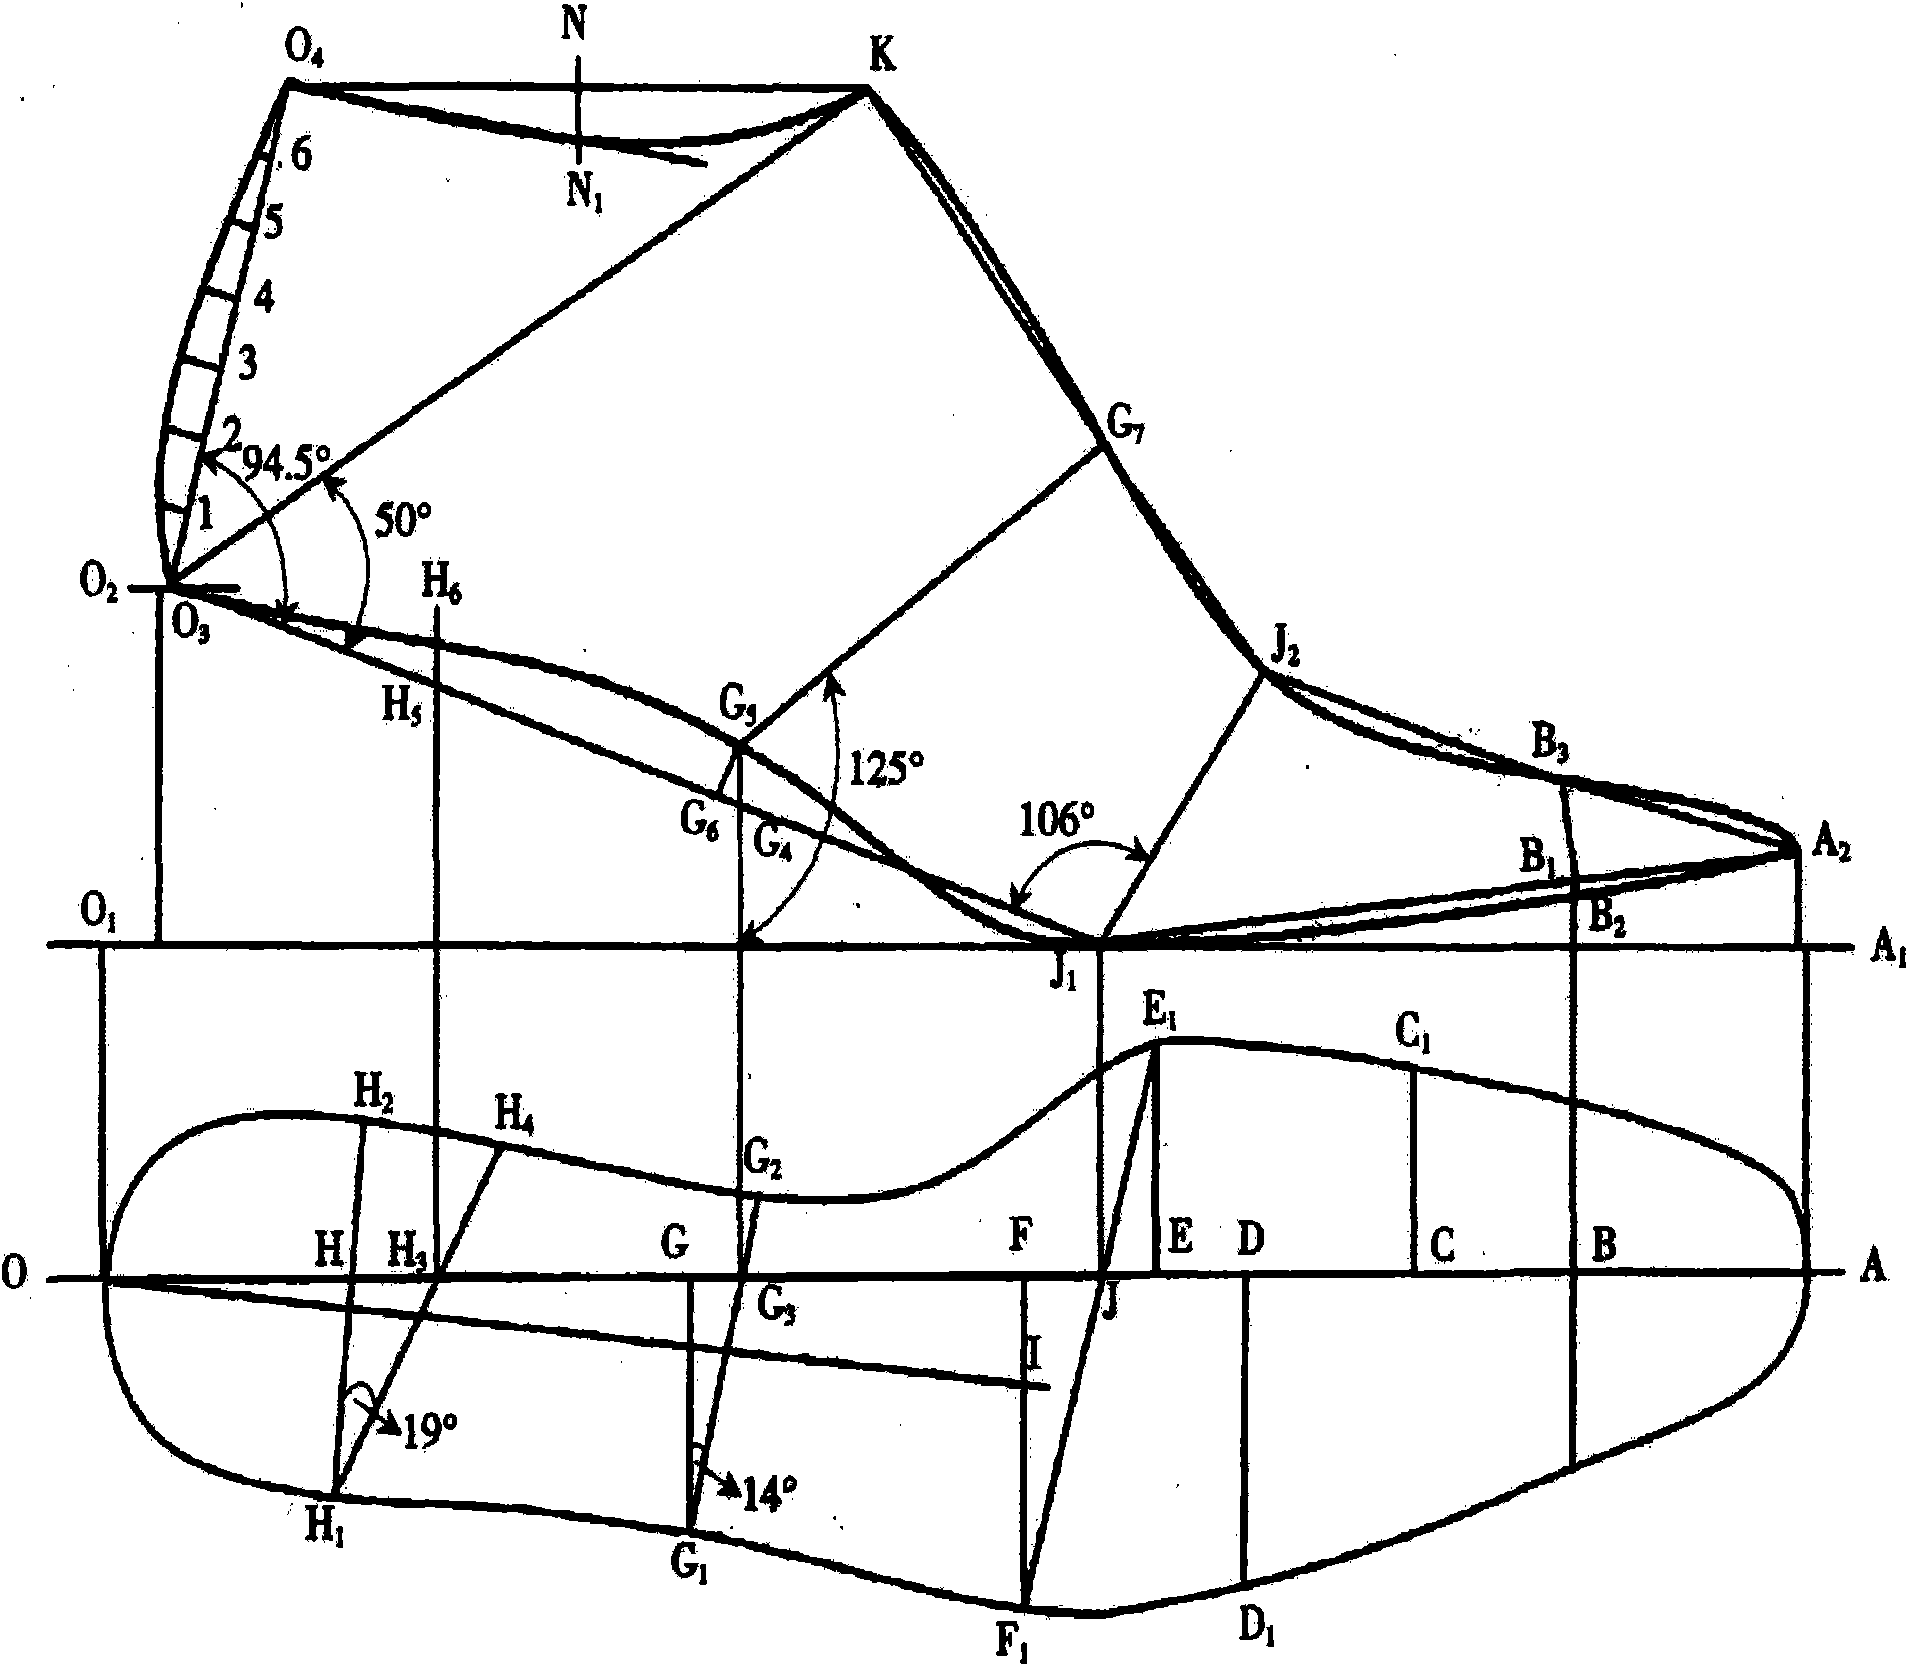 Method for customizing digitalized shoe trees according to a plurality of images of foot shapes